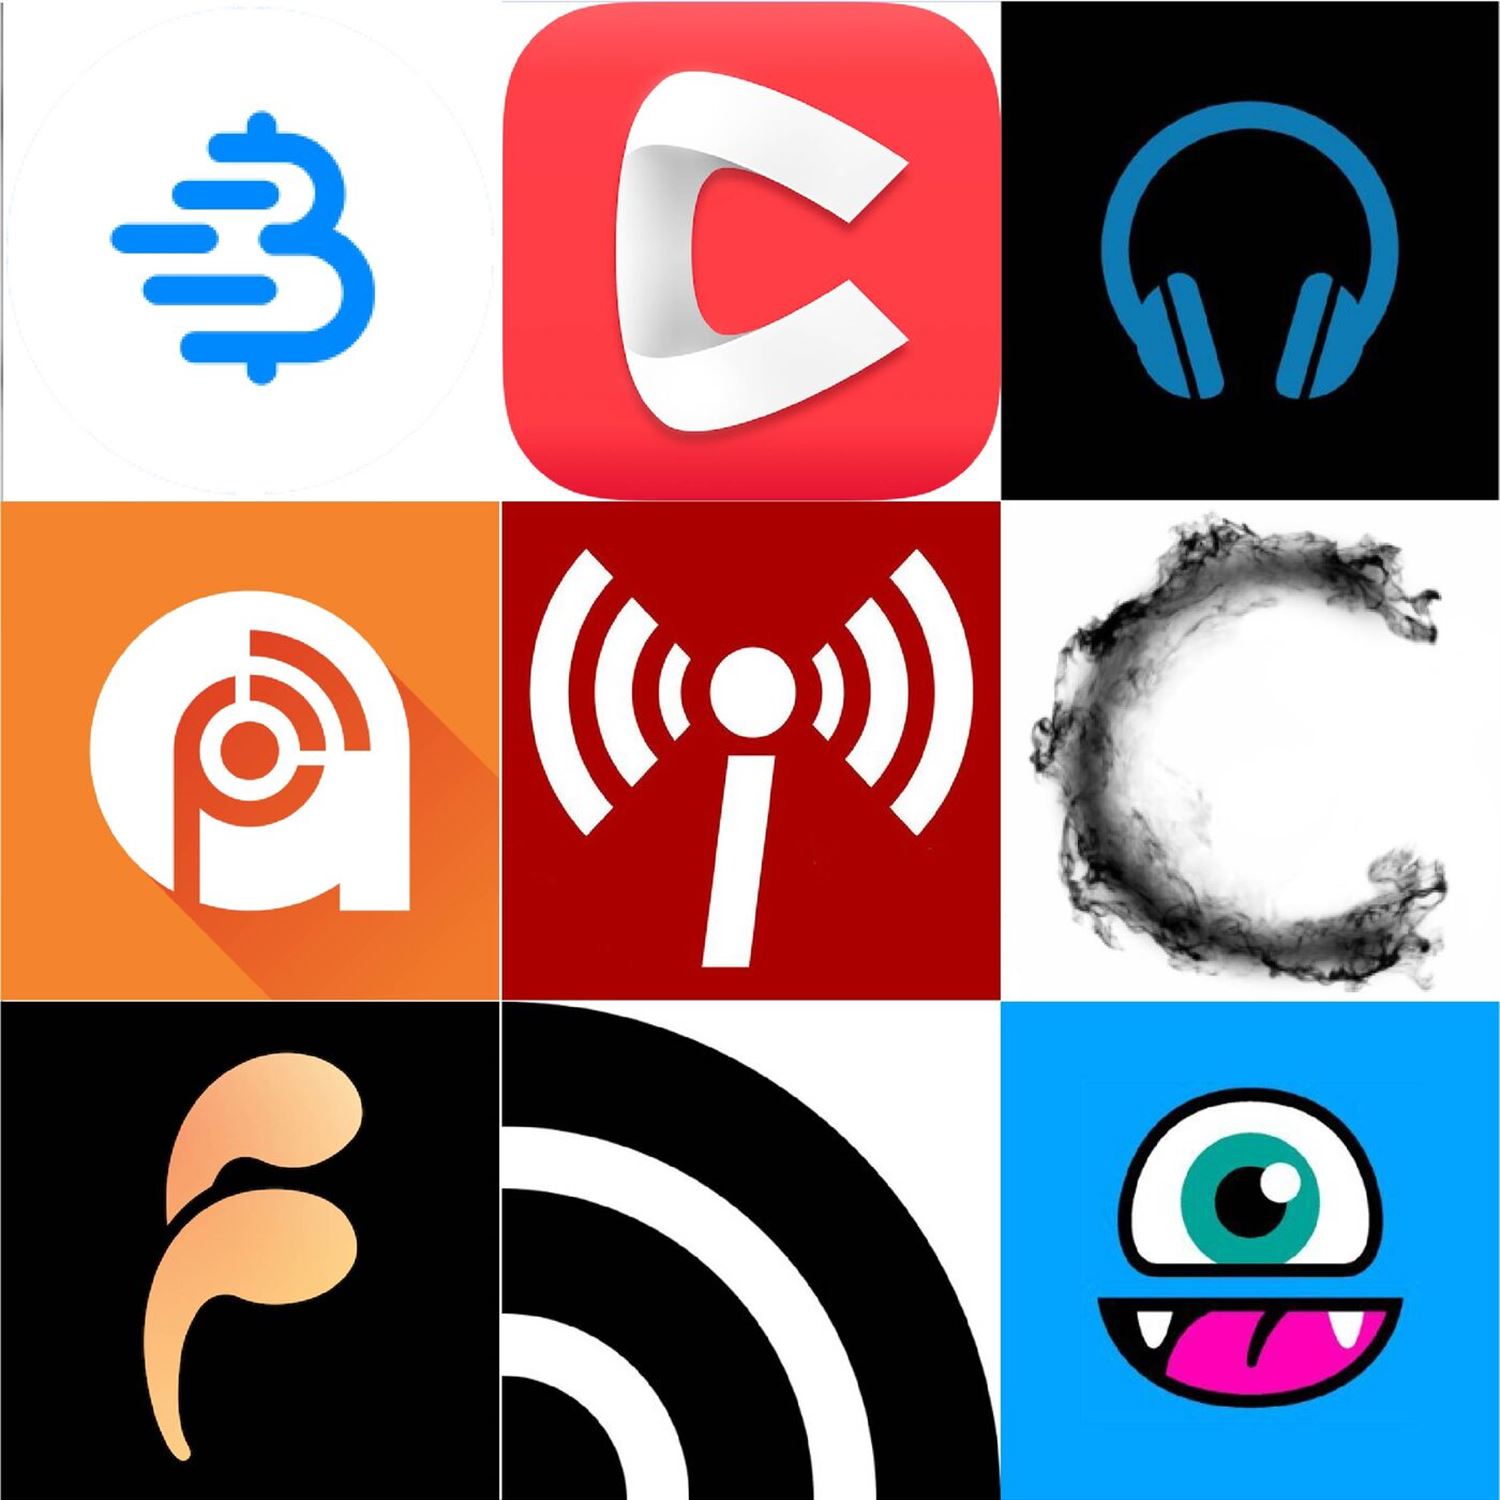 Podcasting 2.0 and new apps